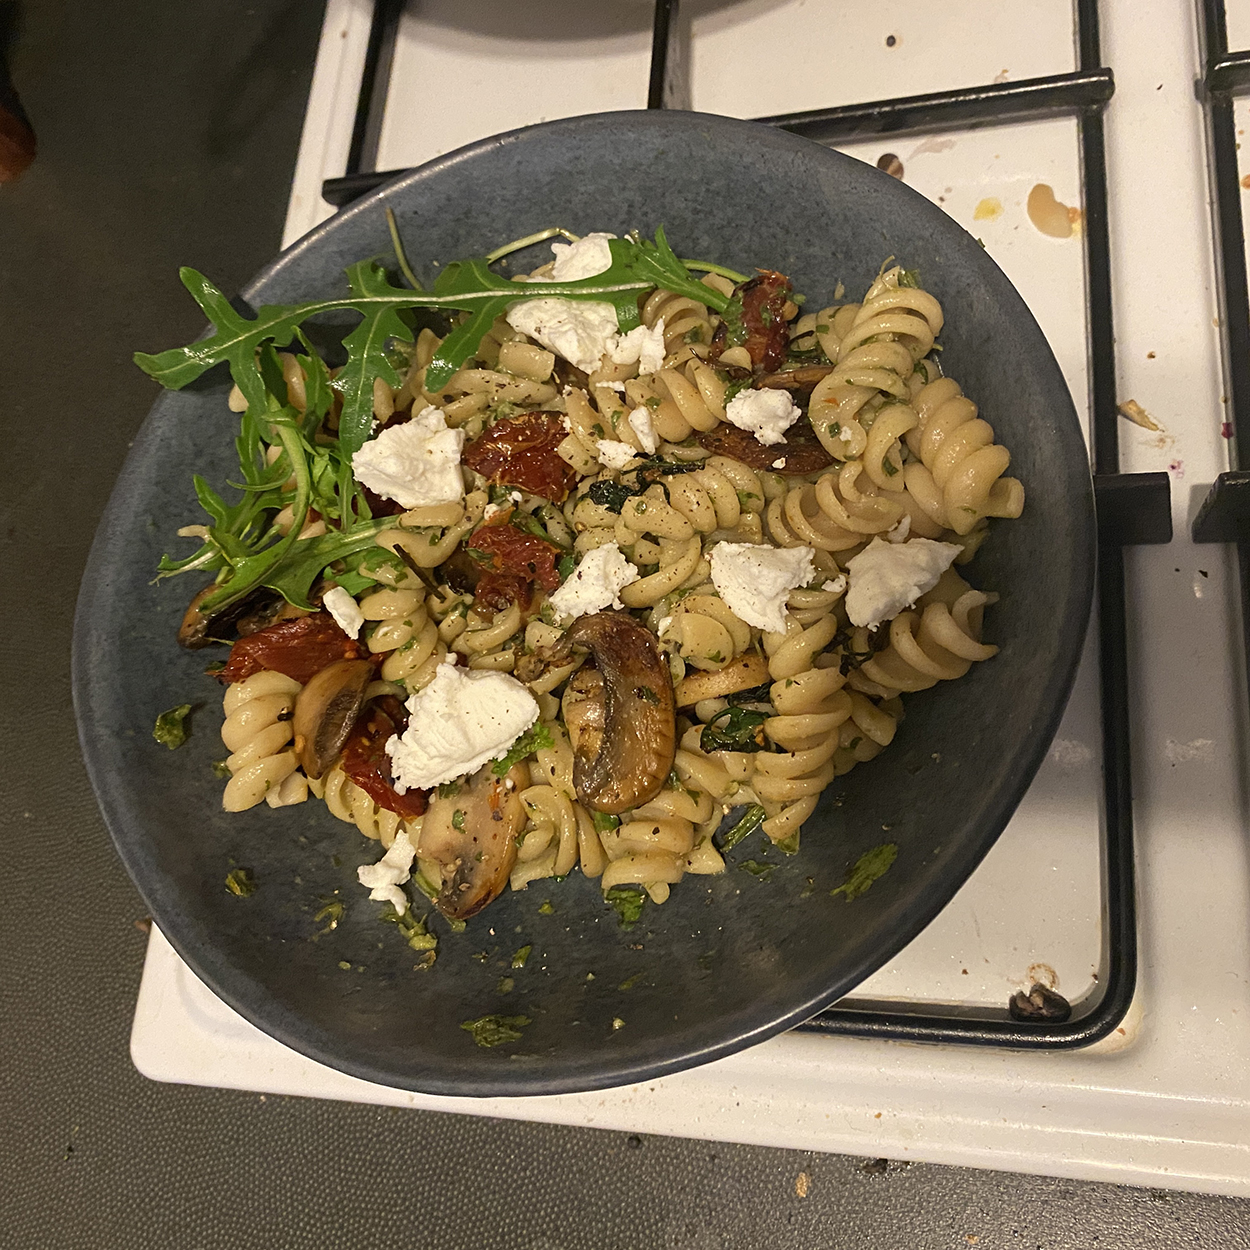 what's cooking? pesto pasta with mushrooms, sun dried tomatoes, goats cheese, and roquette